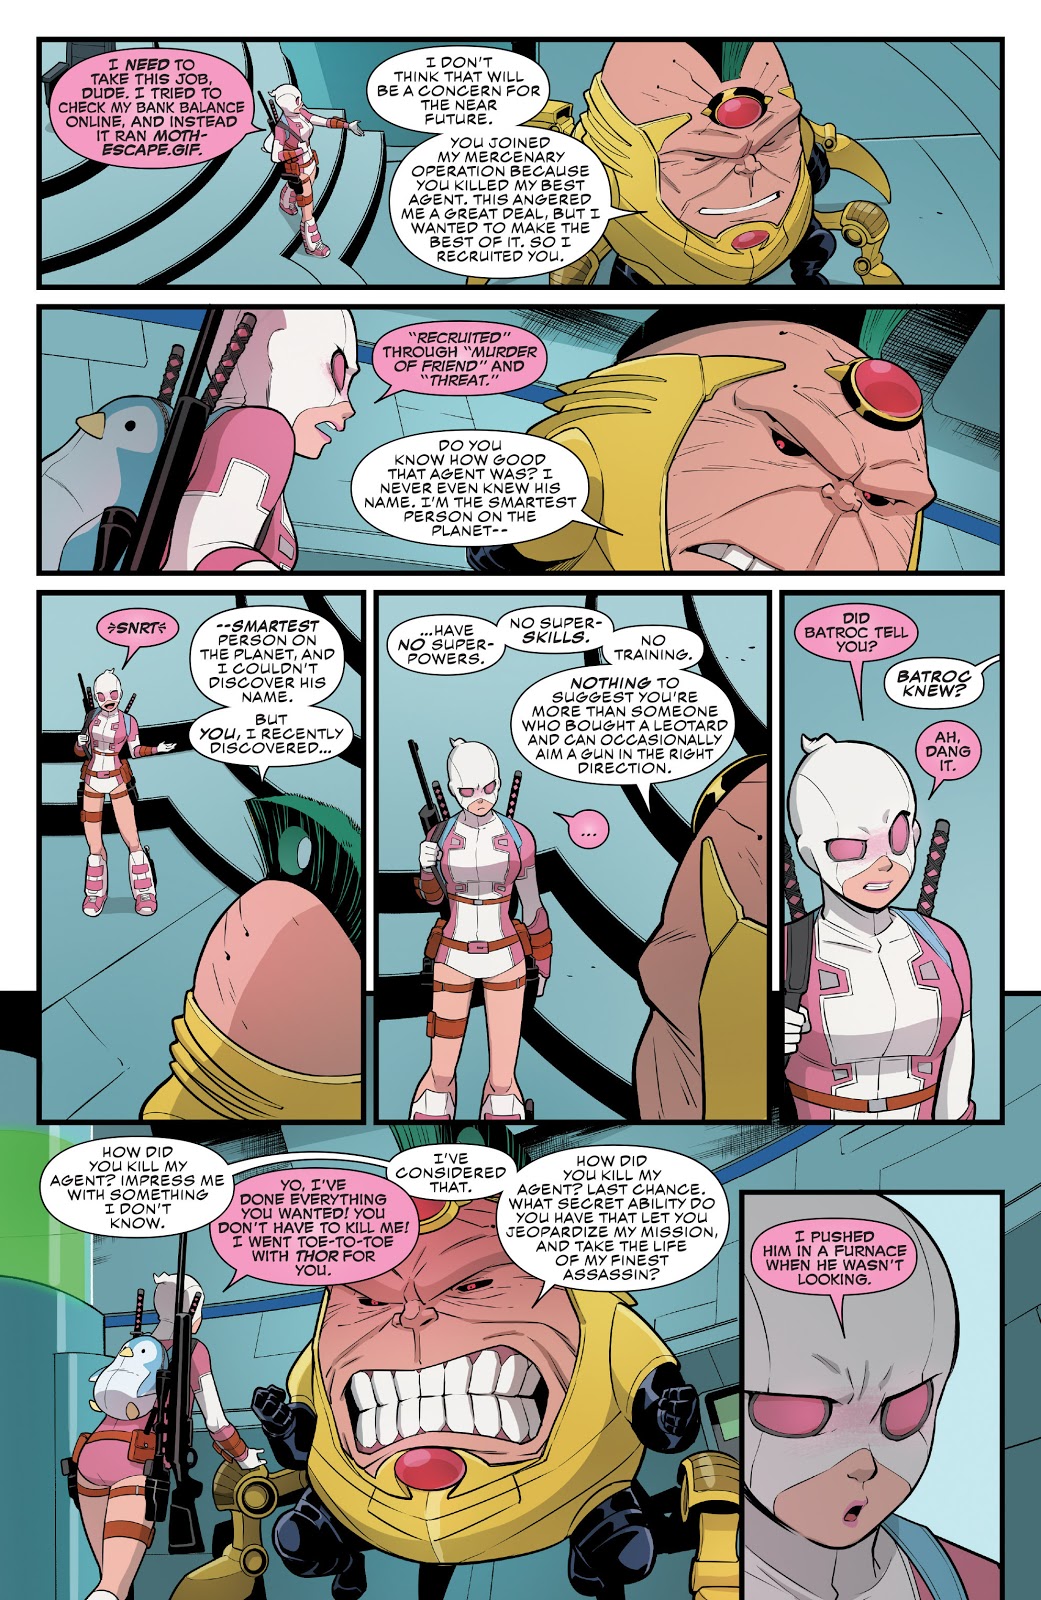 M.O.D.O.K. reveals that he knows Gwenpool has no super powers. Hastings, Christopher. "Unbelievable Gwenpool Vol. 1." Marvel. 9 Nov. 2016.